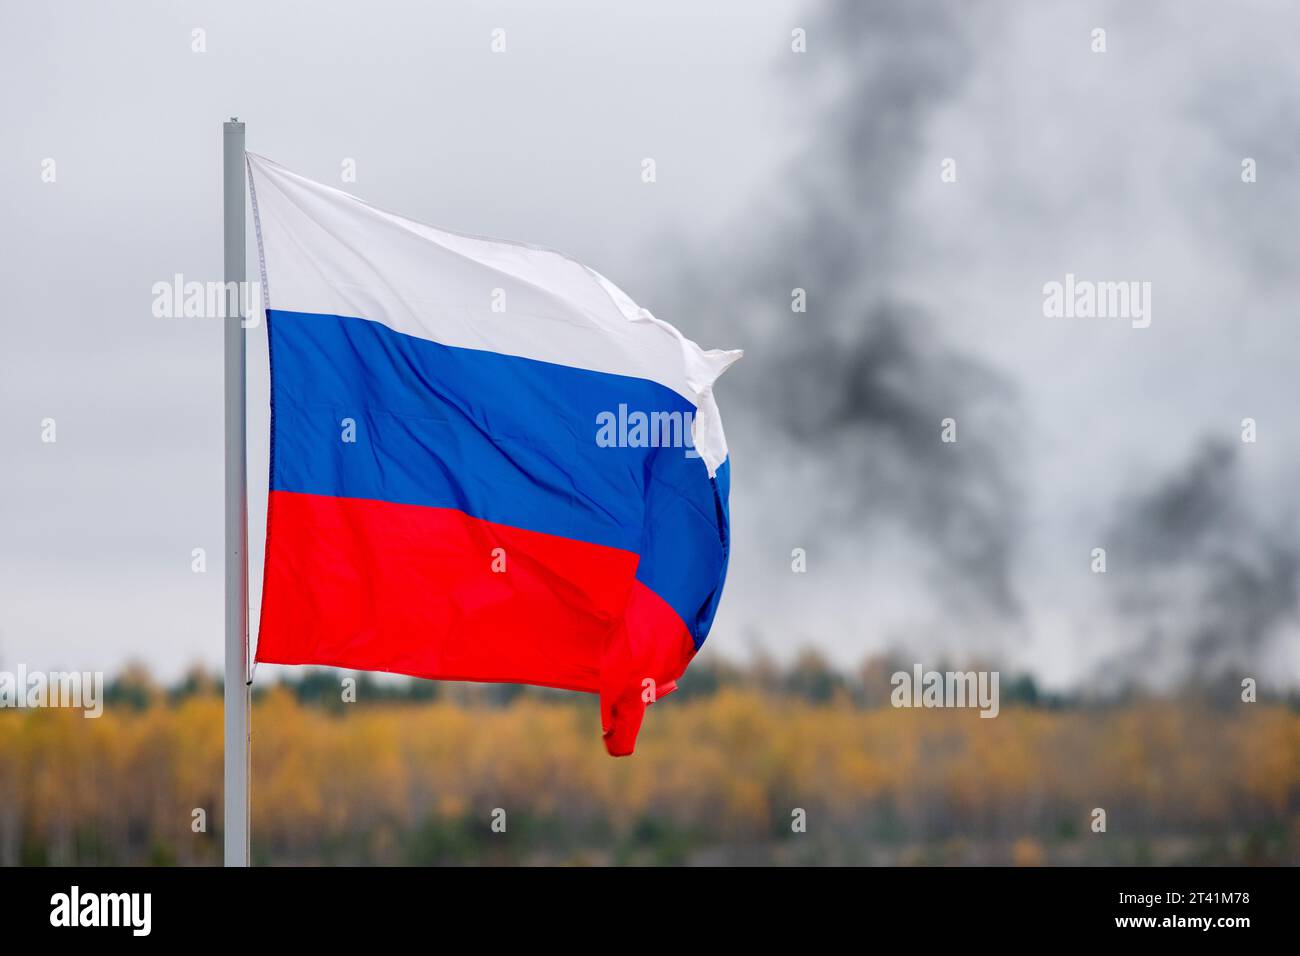 The white-blue-red flag of the Russian Federation is flying in the wind against the background of black smoke in a cloudy sky. Stock Photo